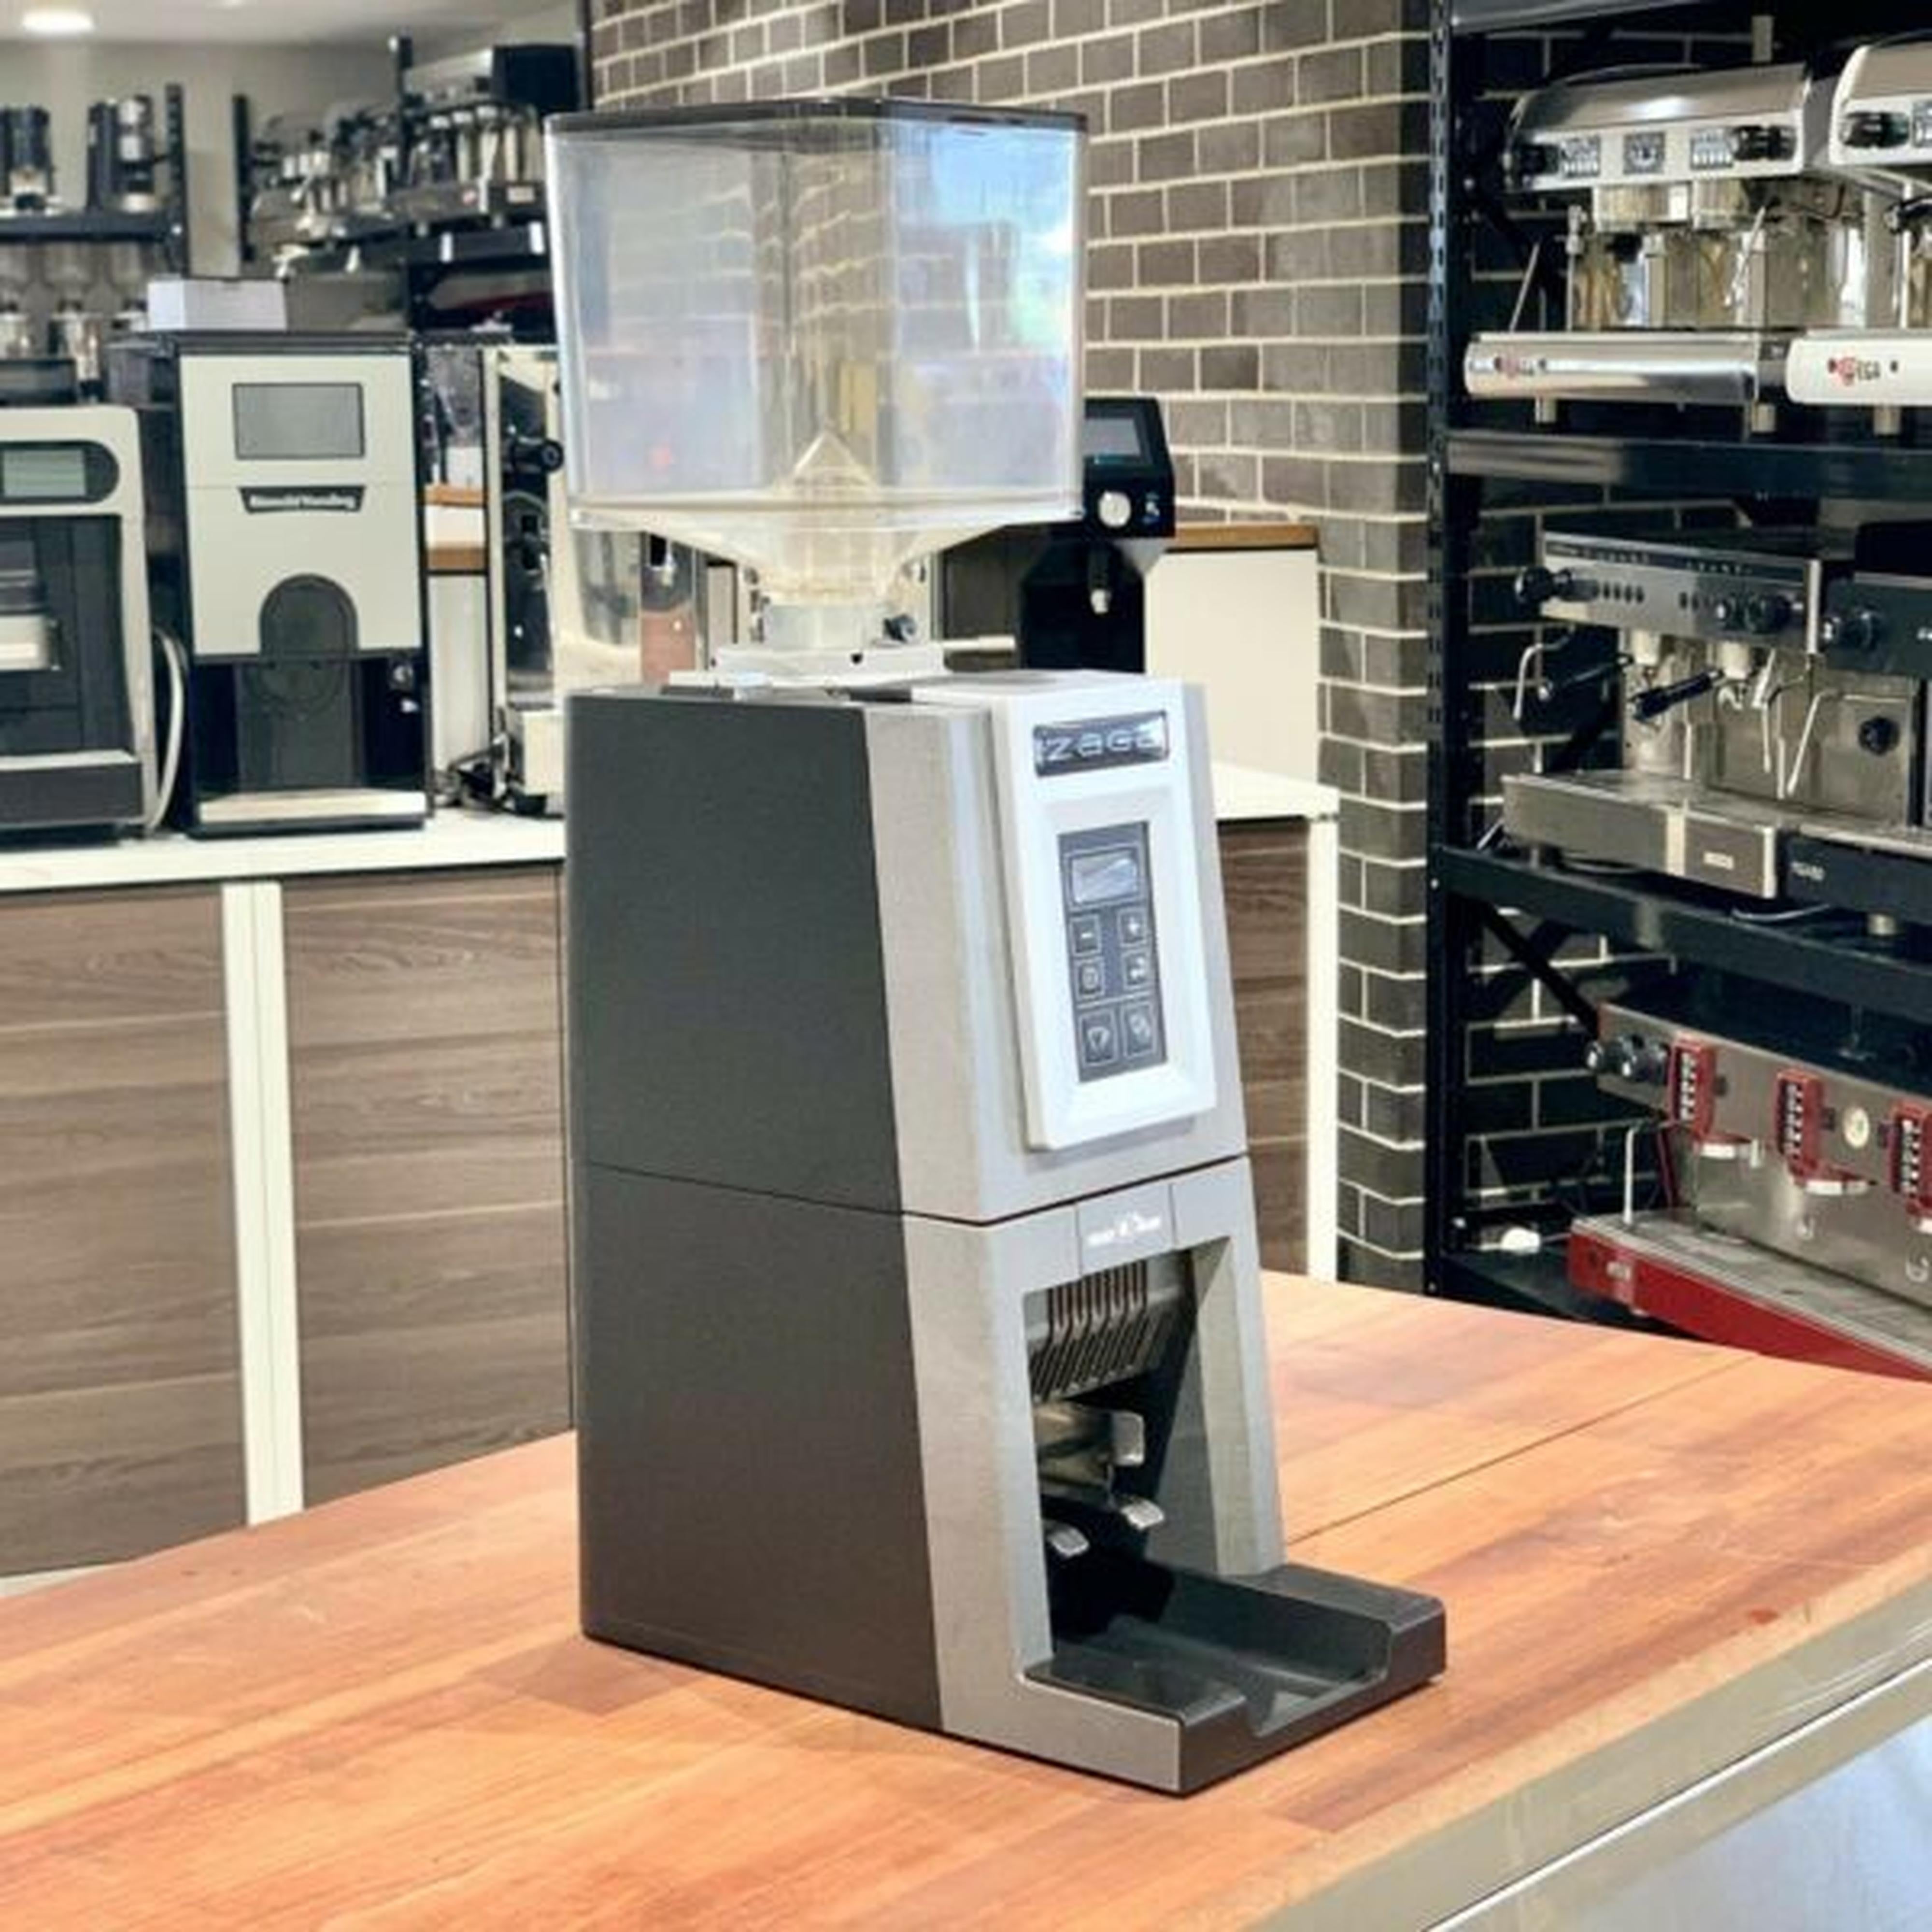 Immaculate Condition markibar Izaga Electronic Coffee Grinder Doserles